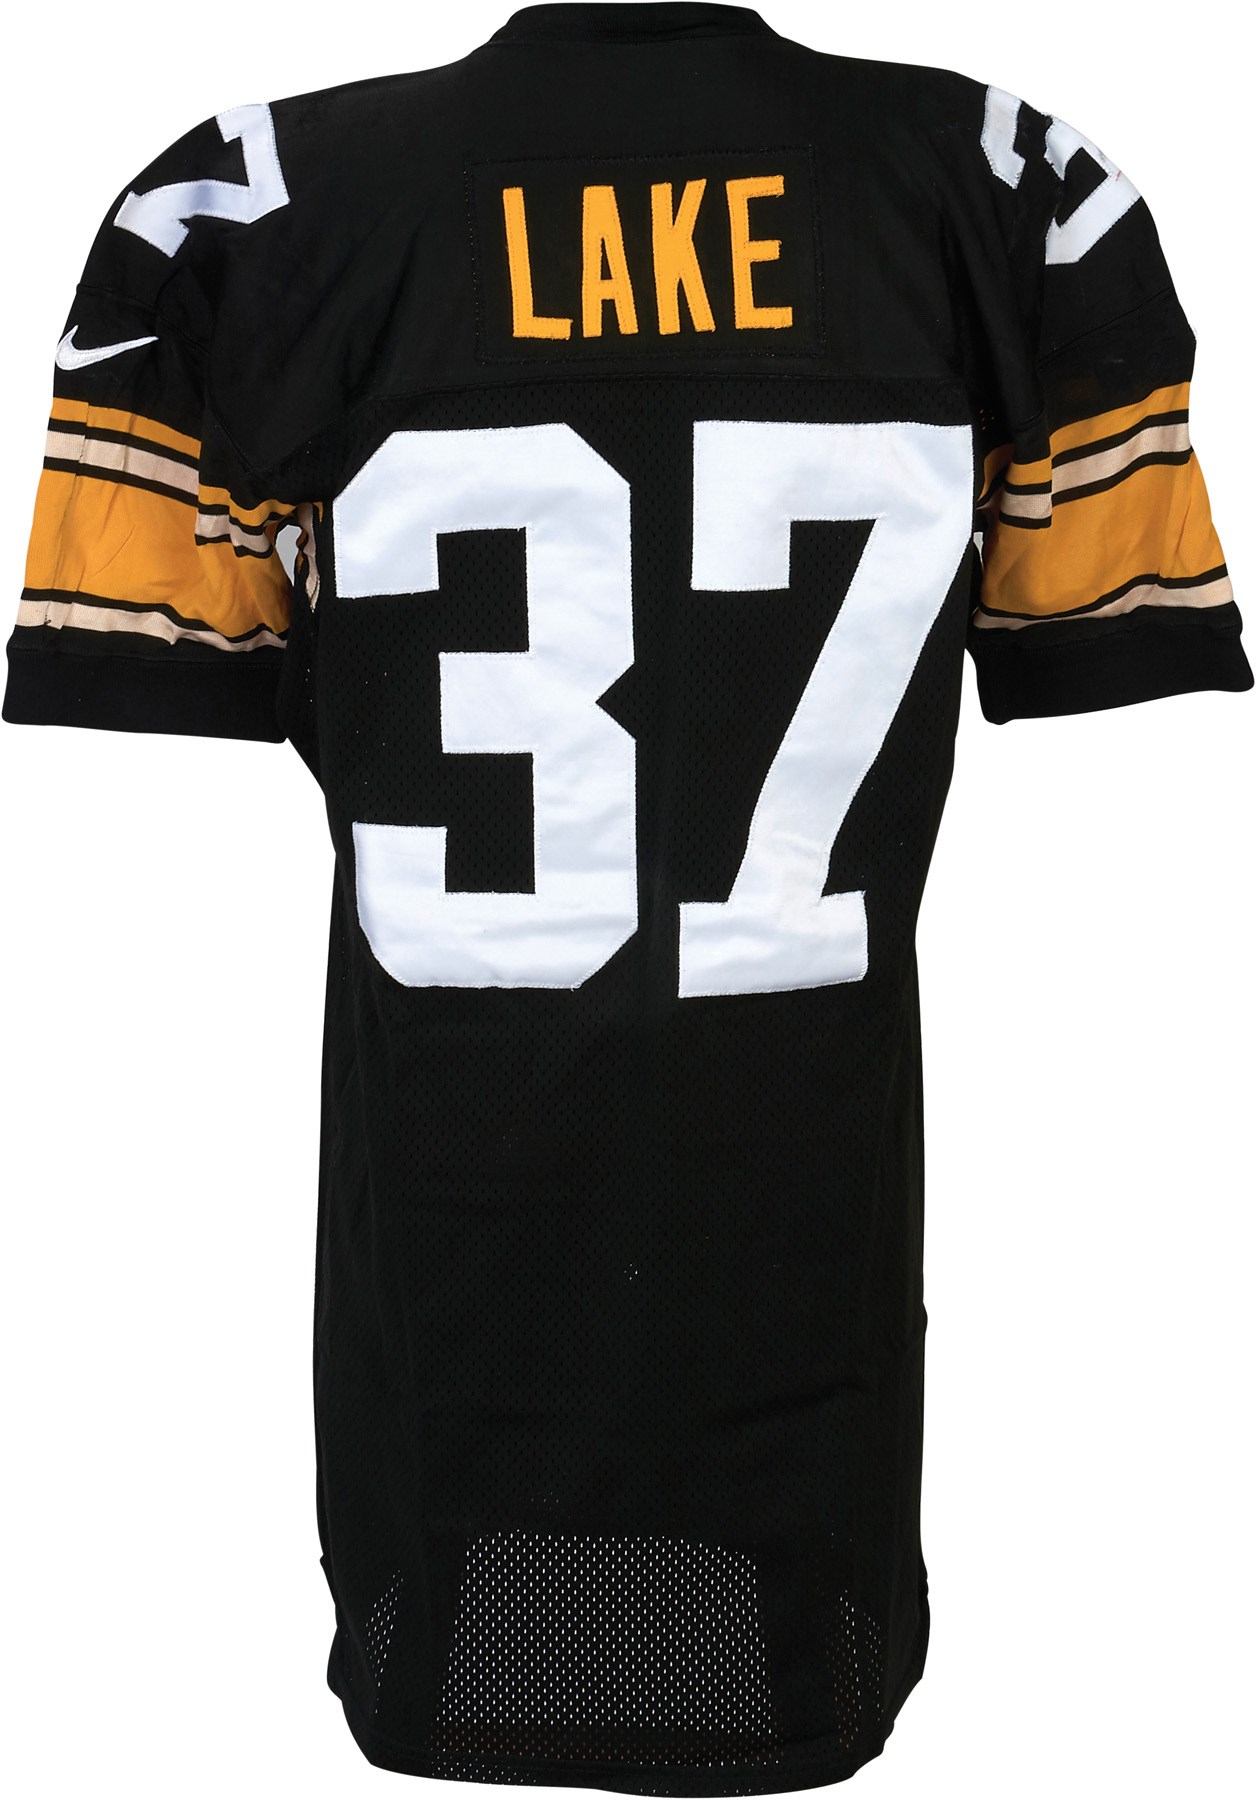 - 1996 Carnell Lake Pittsburgh Steelers Game Worn Jersey (Photo-Matched)